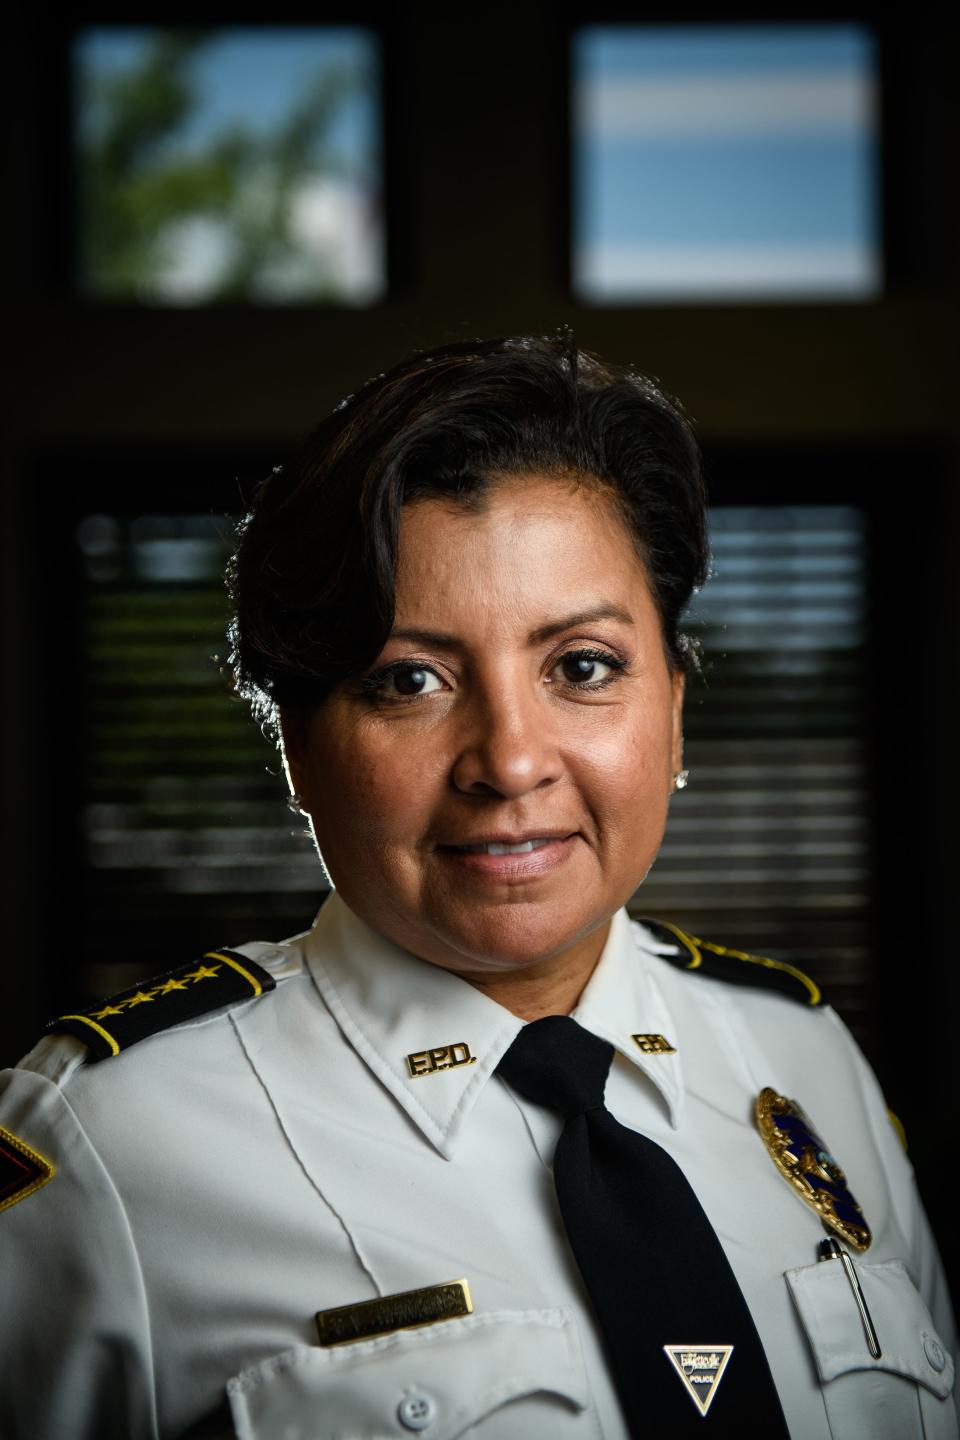 Fayetteville Police Chief Gina Hawkins